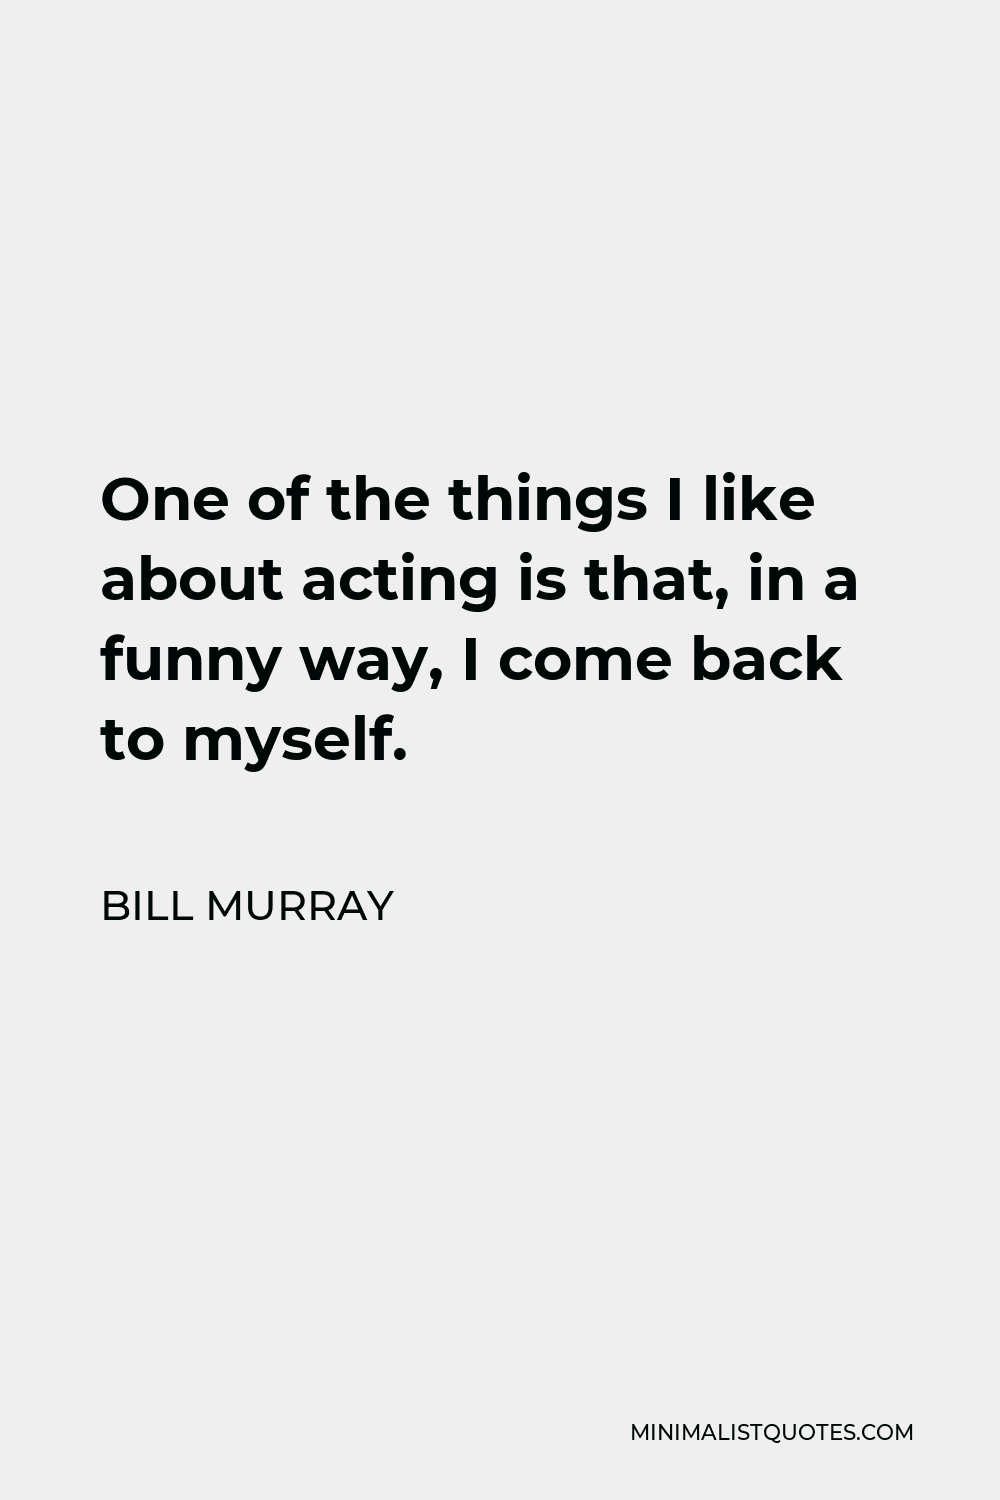 Bill Murray Quote - One of the things I like about acting is that, in a funny way, I come back to myself.